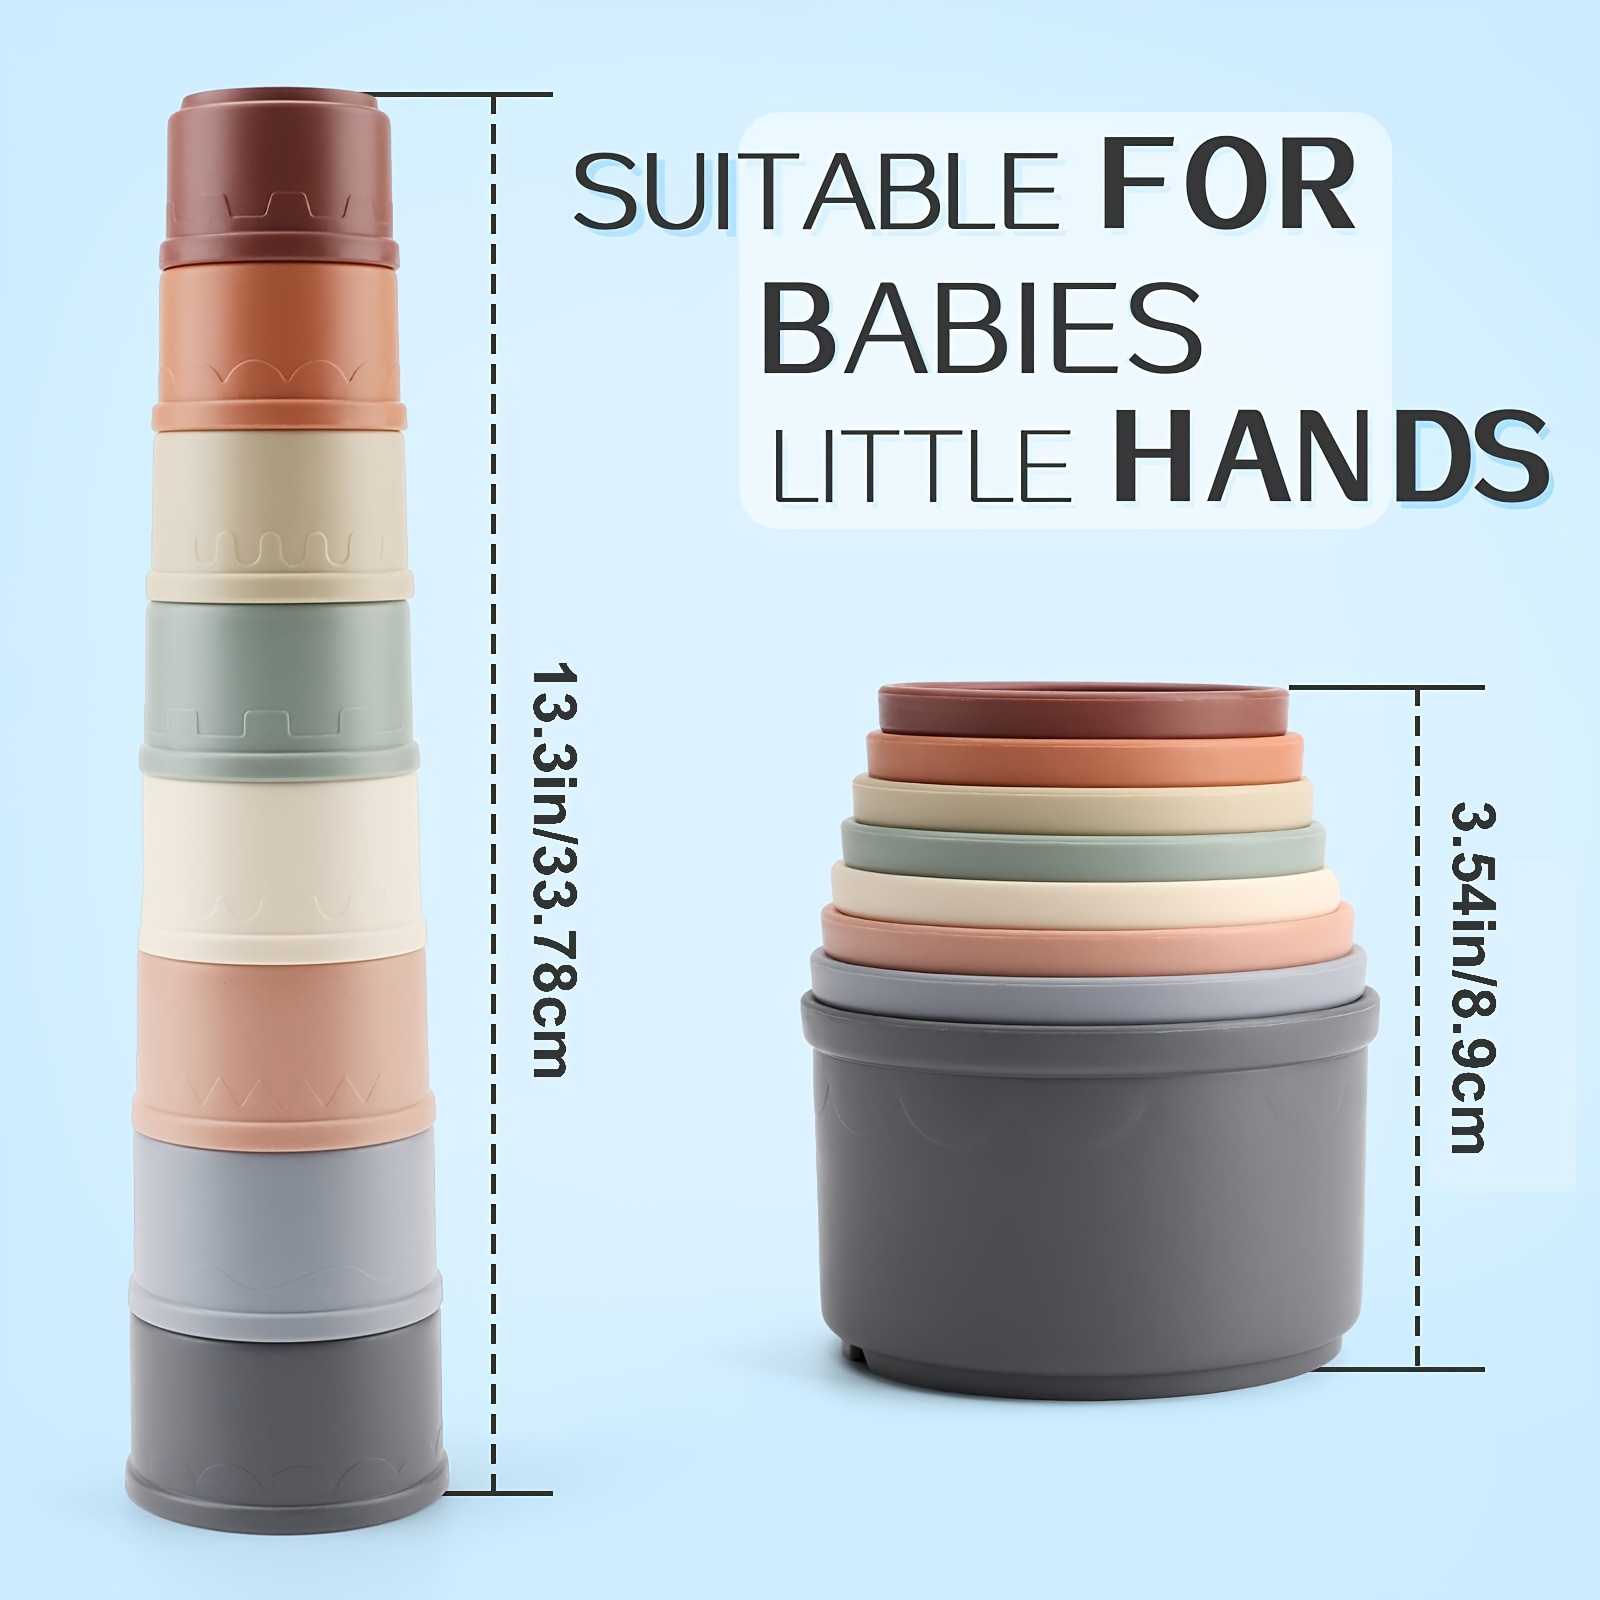 Stacking Cups: A Fun & Engaging Toy For Toddlers 6 Months & Up - Boys &  Girls 1-3 Years Old (random Color) - Temu